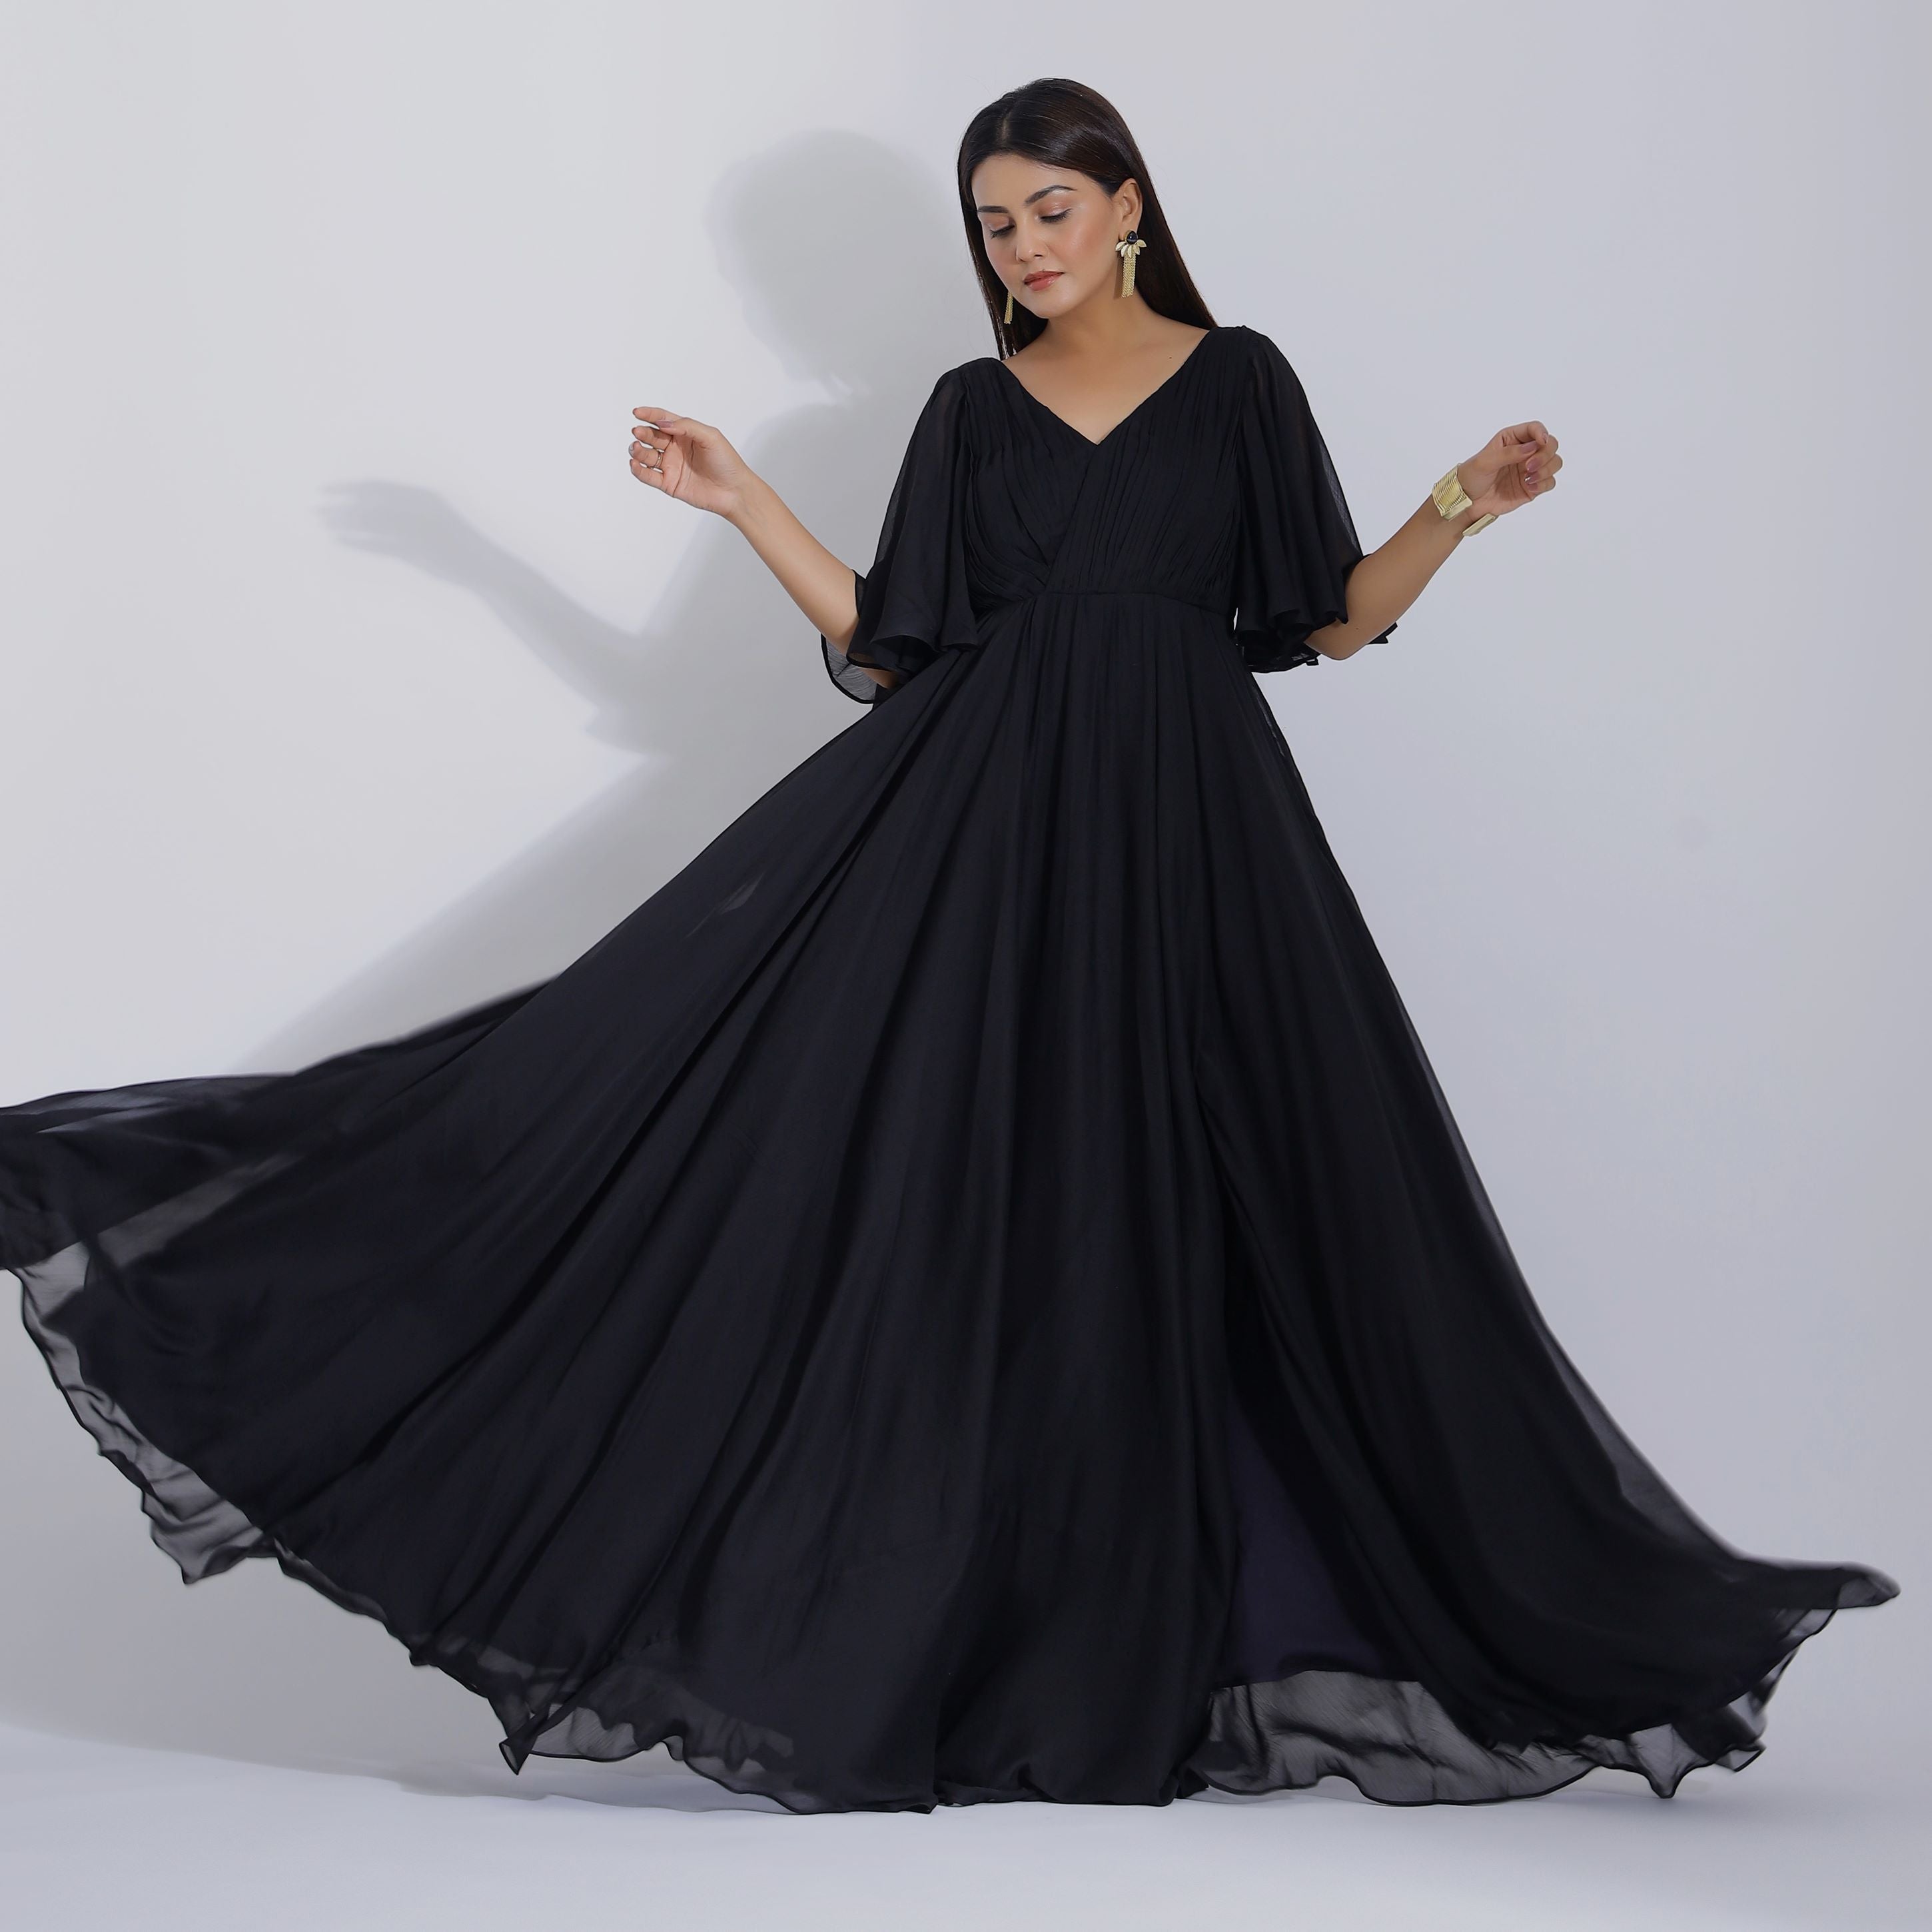 Black Evening Gown for reception party